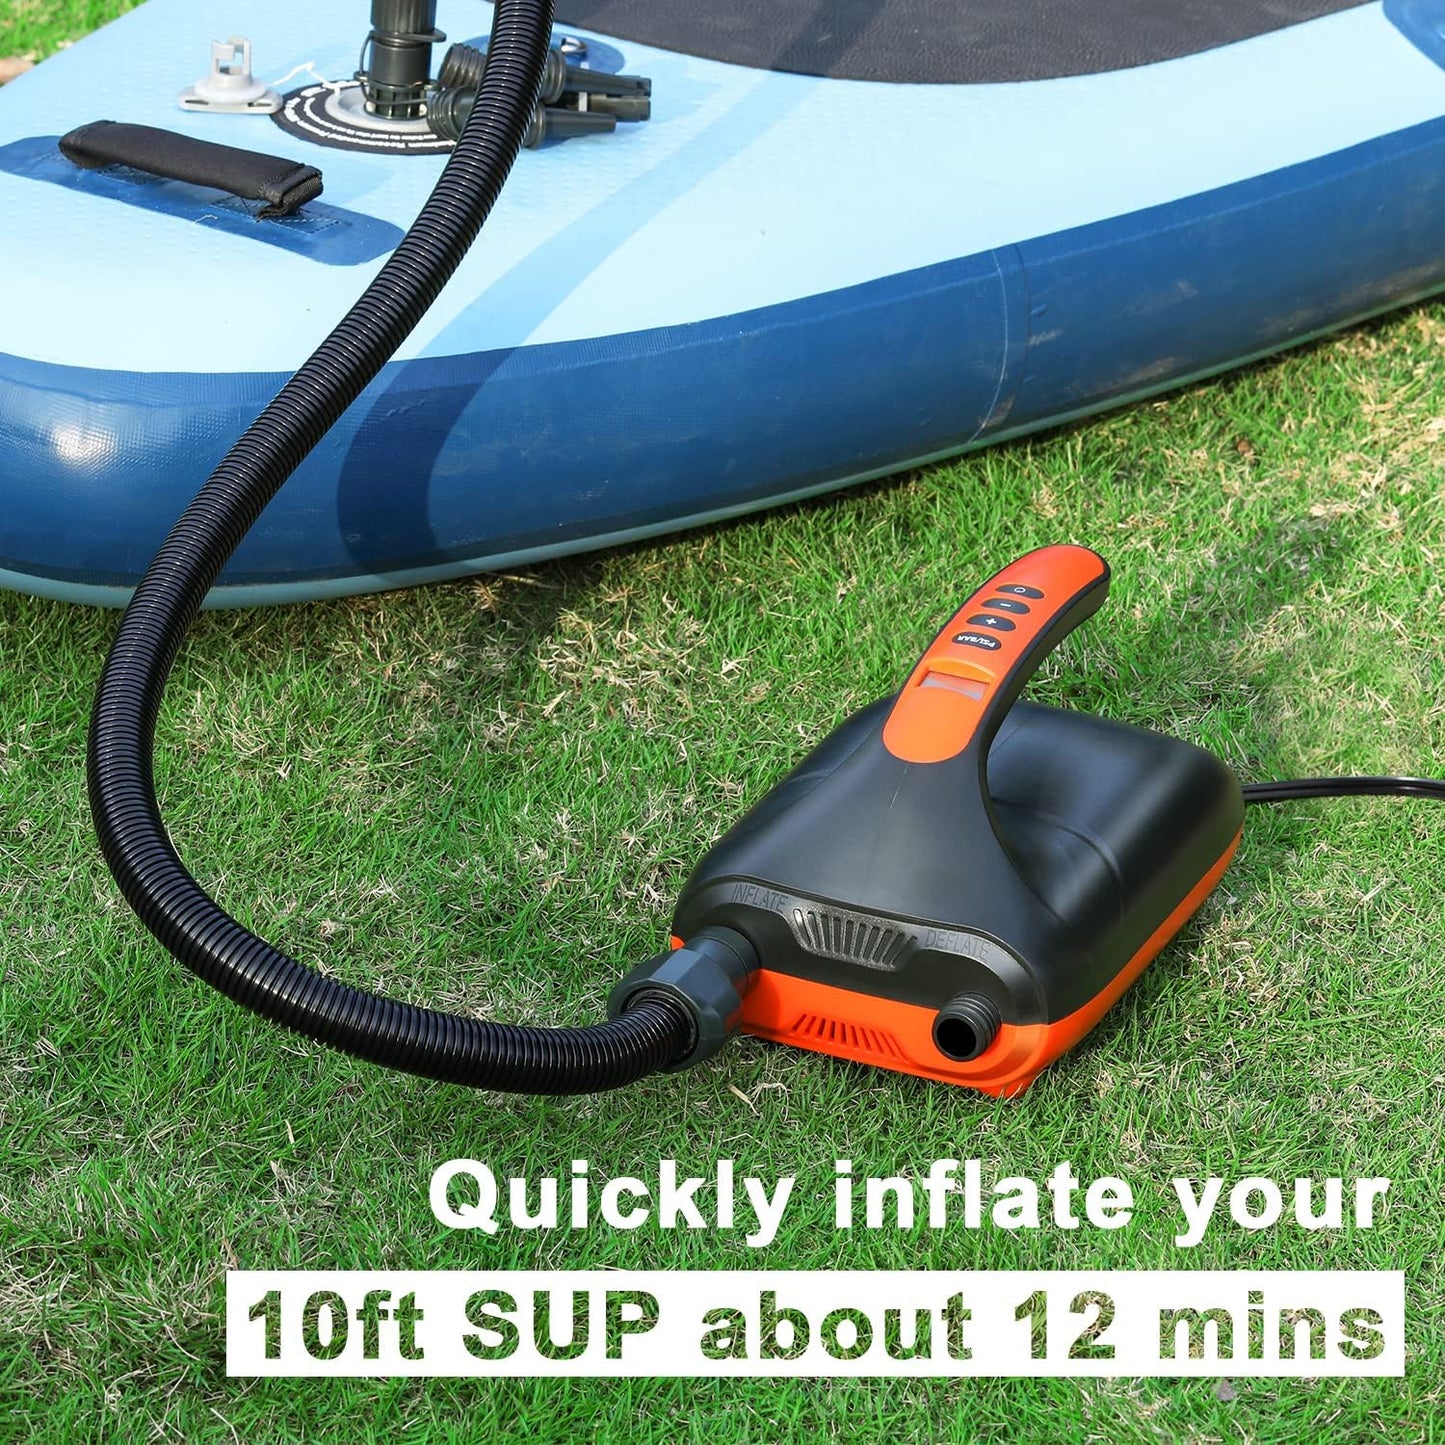 20PSI High Pressure SUP Air Pump, Dual Stage Inflation & Deflation Function Paddle Board Pump, 12V DC Car Connector, for Inflatable Stand Up Paddle Boards, Boats, Tent Kayaks Namiedstore